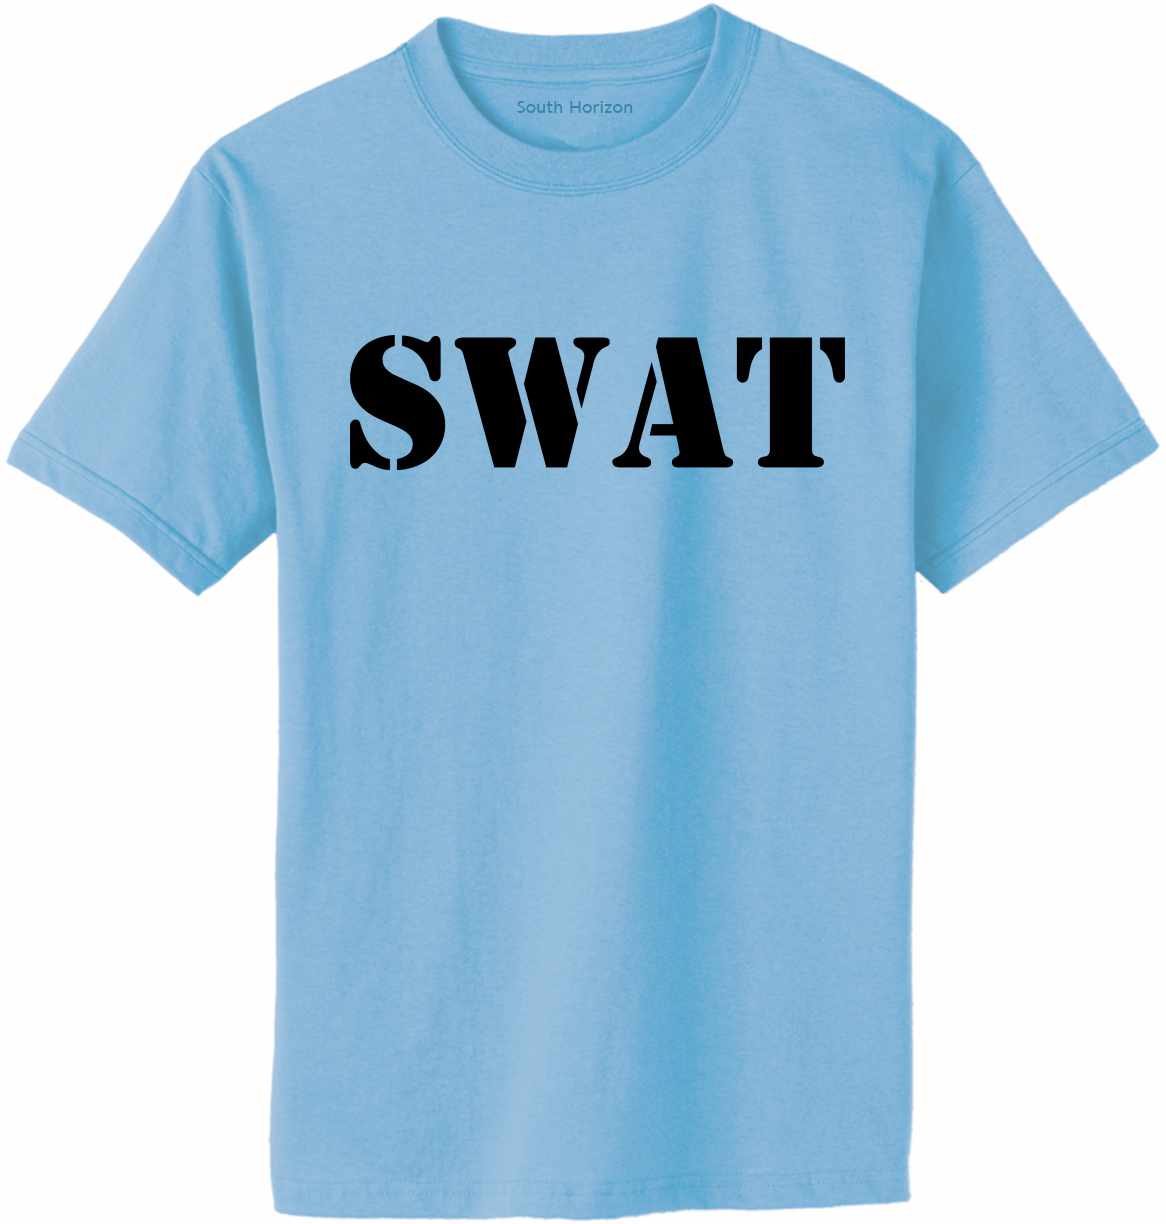 SWAT on Adult T-Shirt in 17 colors – South Horizon T-Shirt Company